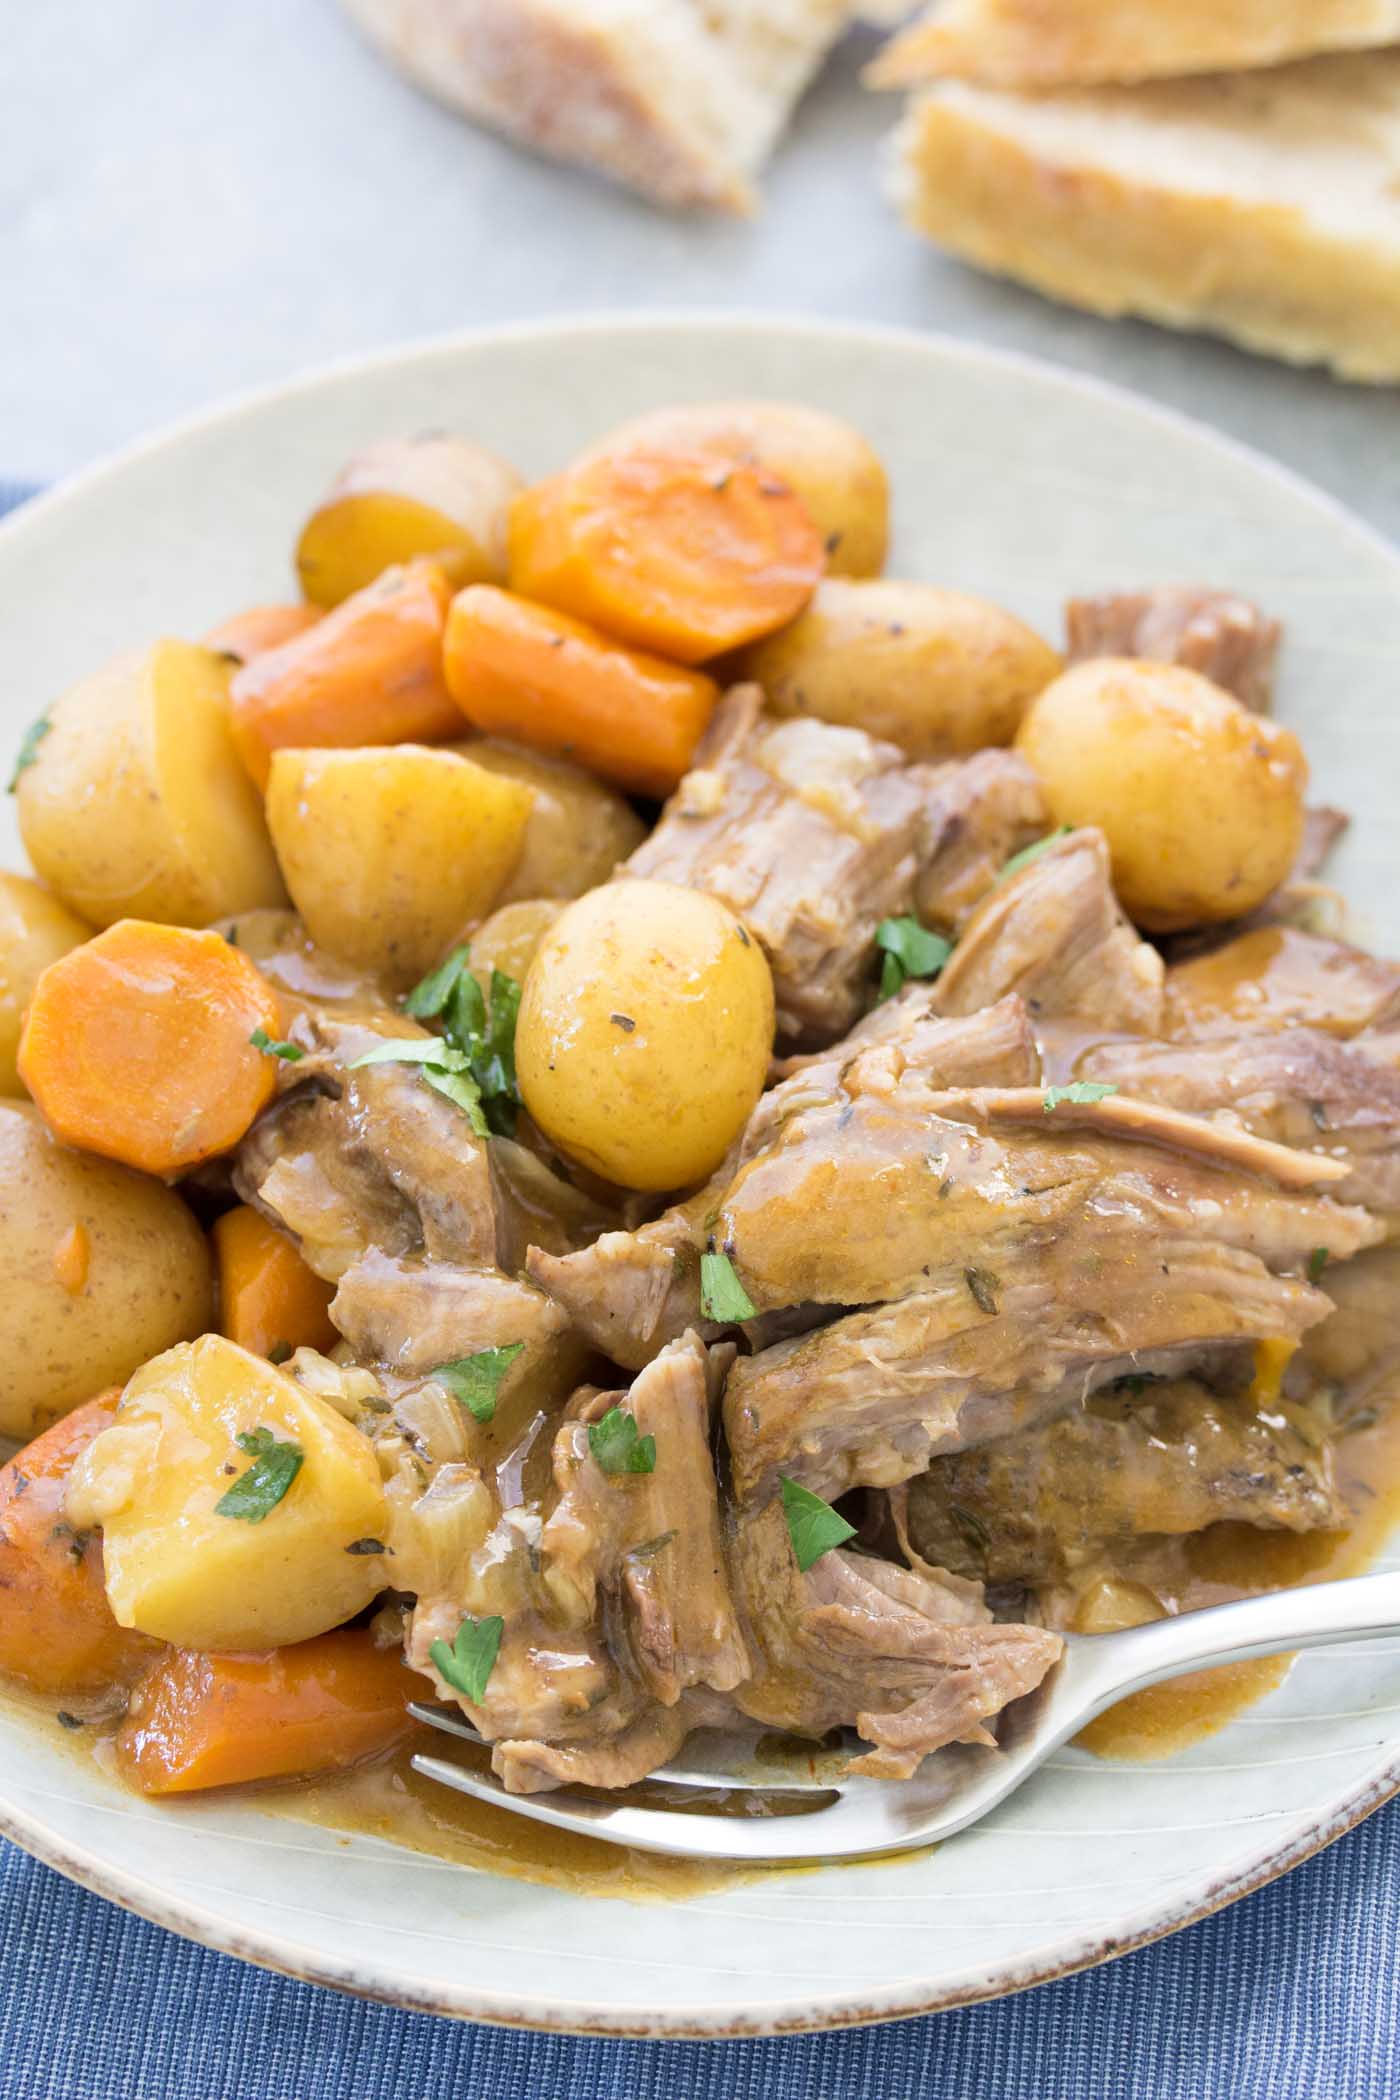 Pot roast with potatoes and carrots served on a plate with a fork.